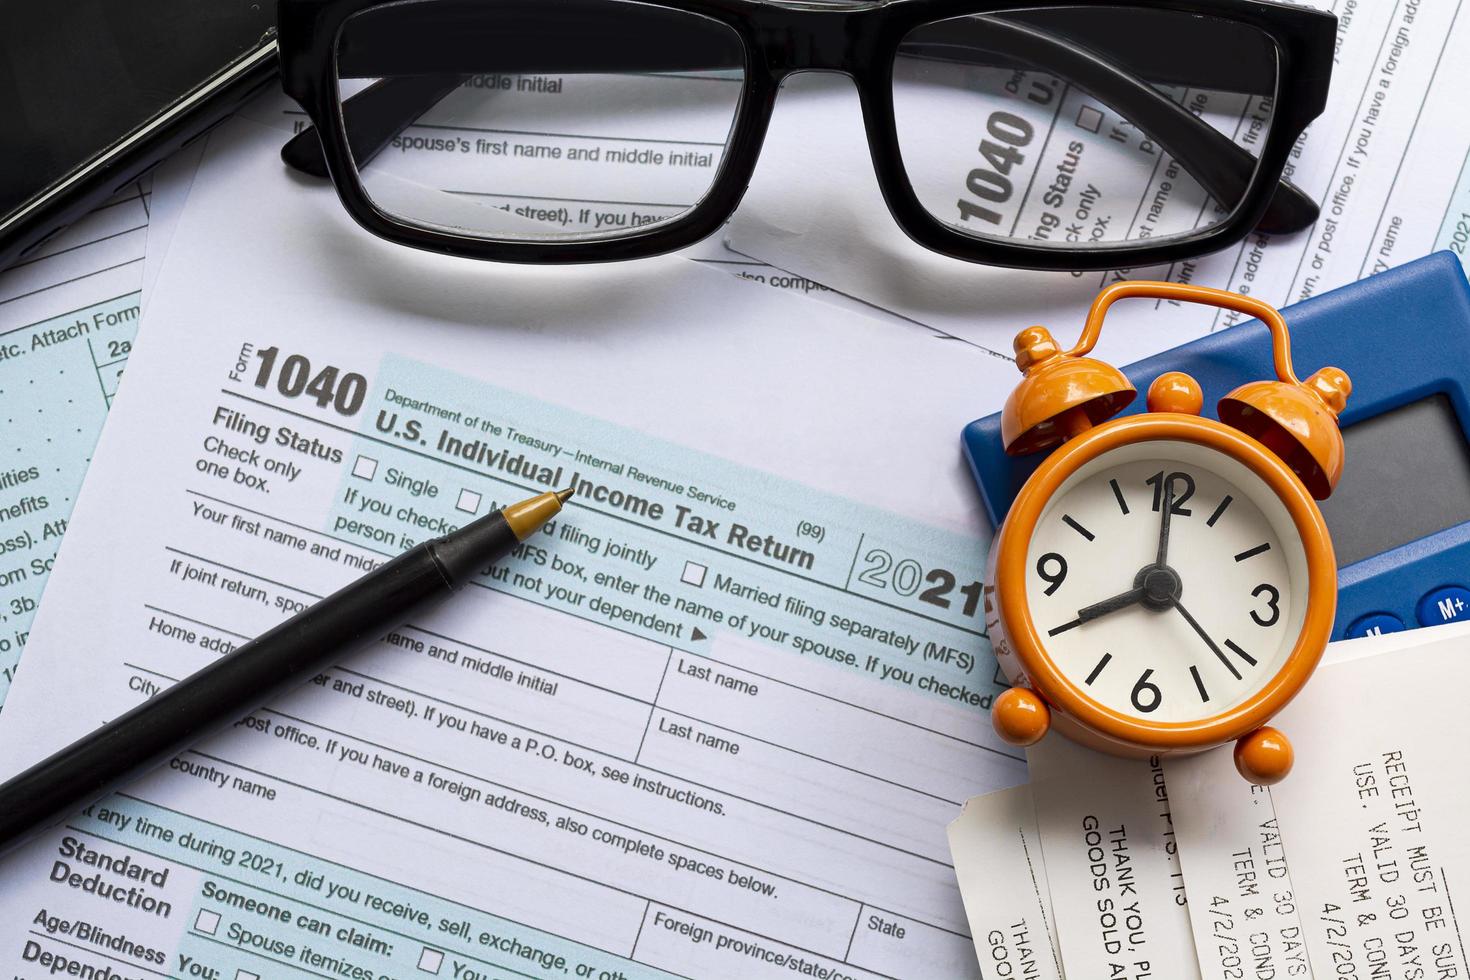 Tax forms 1040. U.S Individual Income Tax Return. Time to pay tax in year. photo